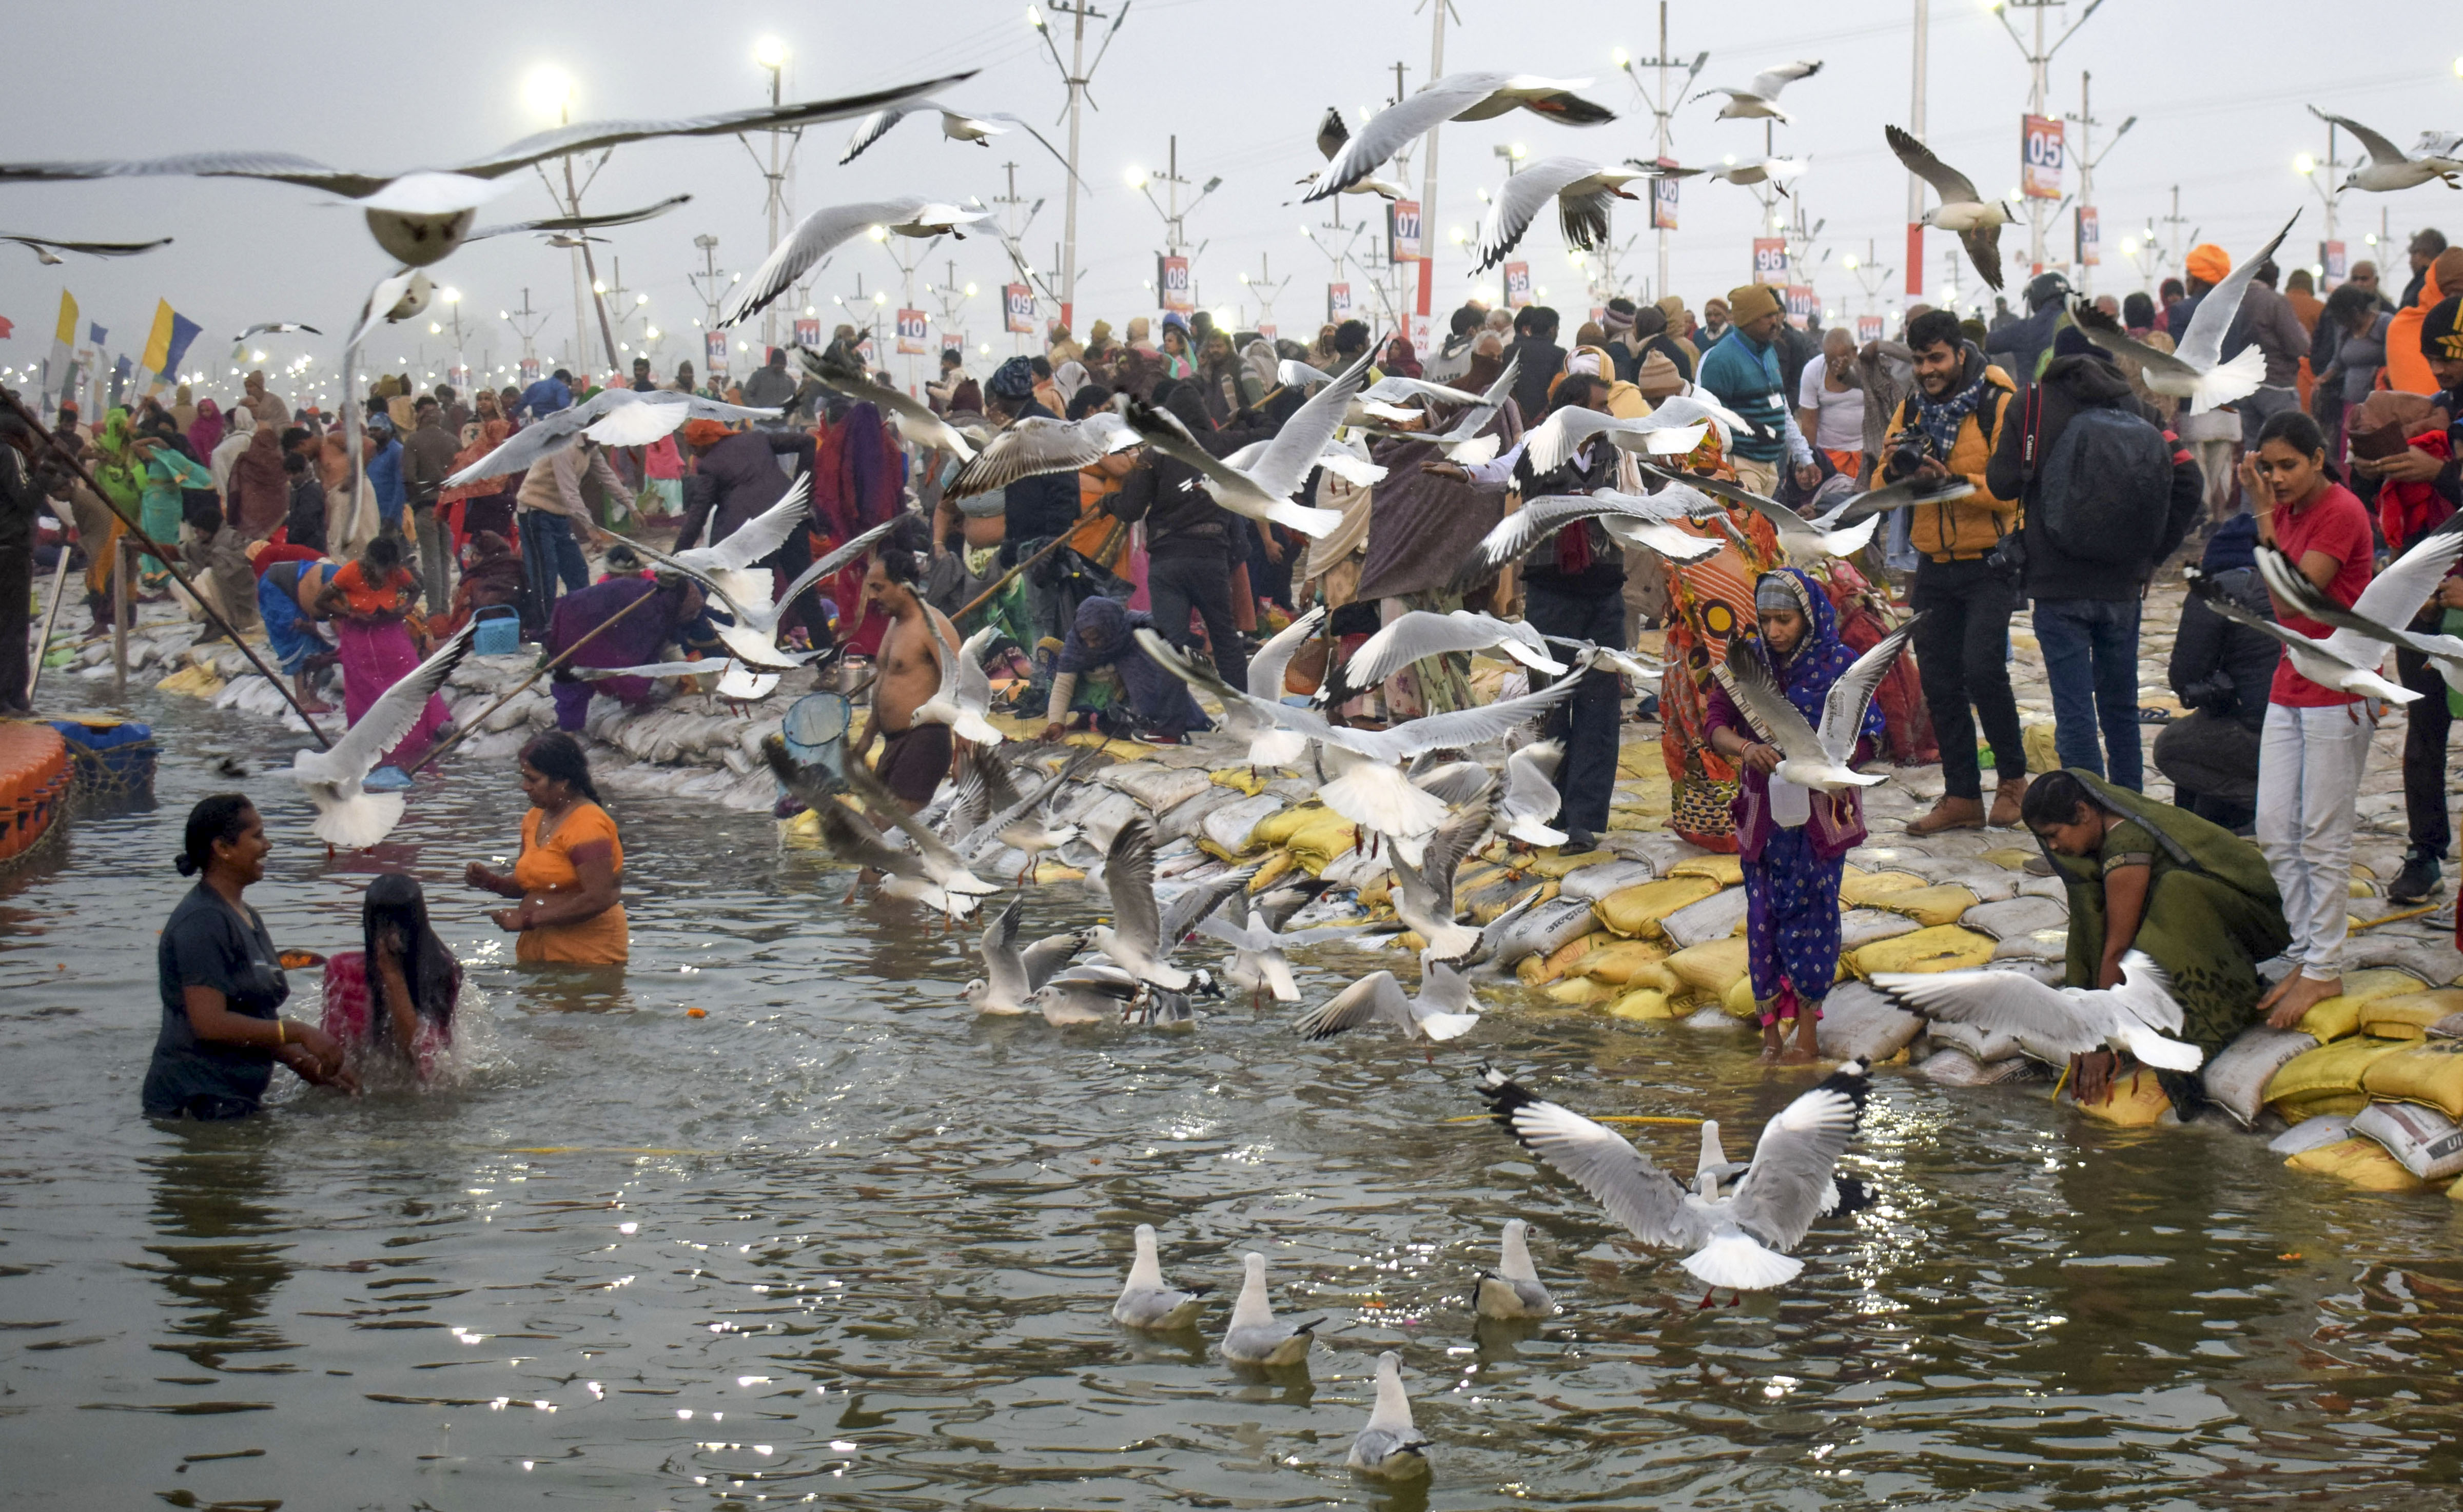 Devotees offer prayers on the banks of River Ganga as migratory birds fly, on the occasion of 'Paush Purnima' in Prayagraj (Allahabad) - PTI